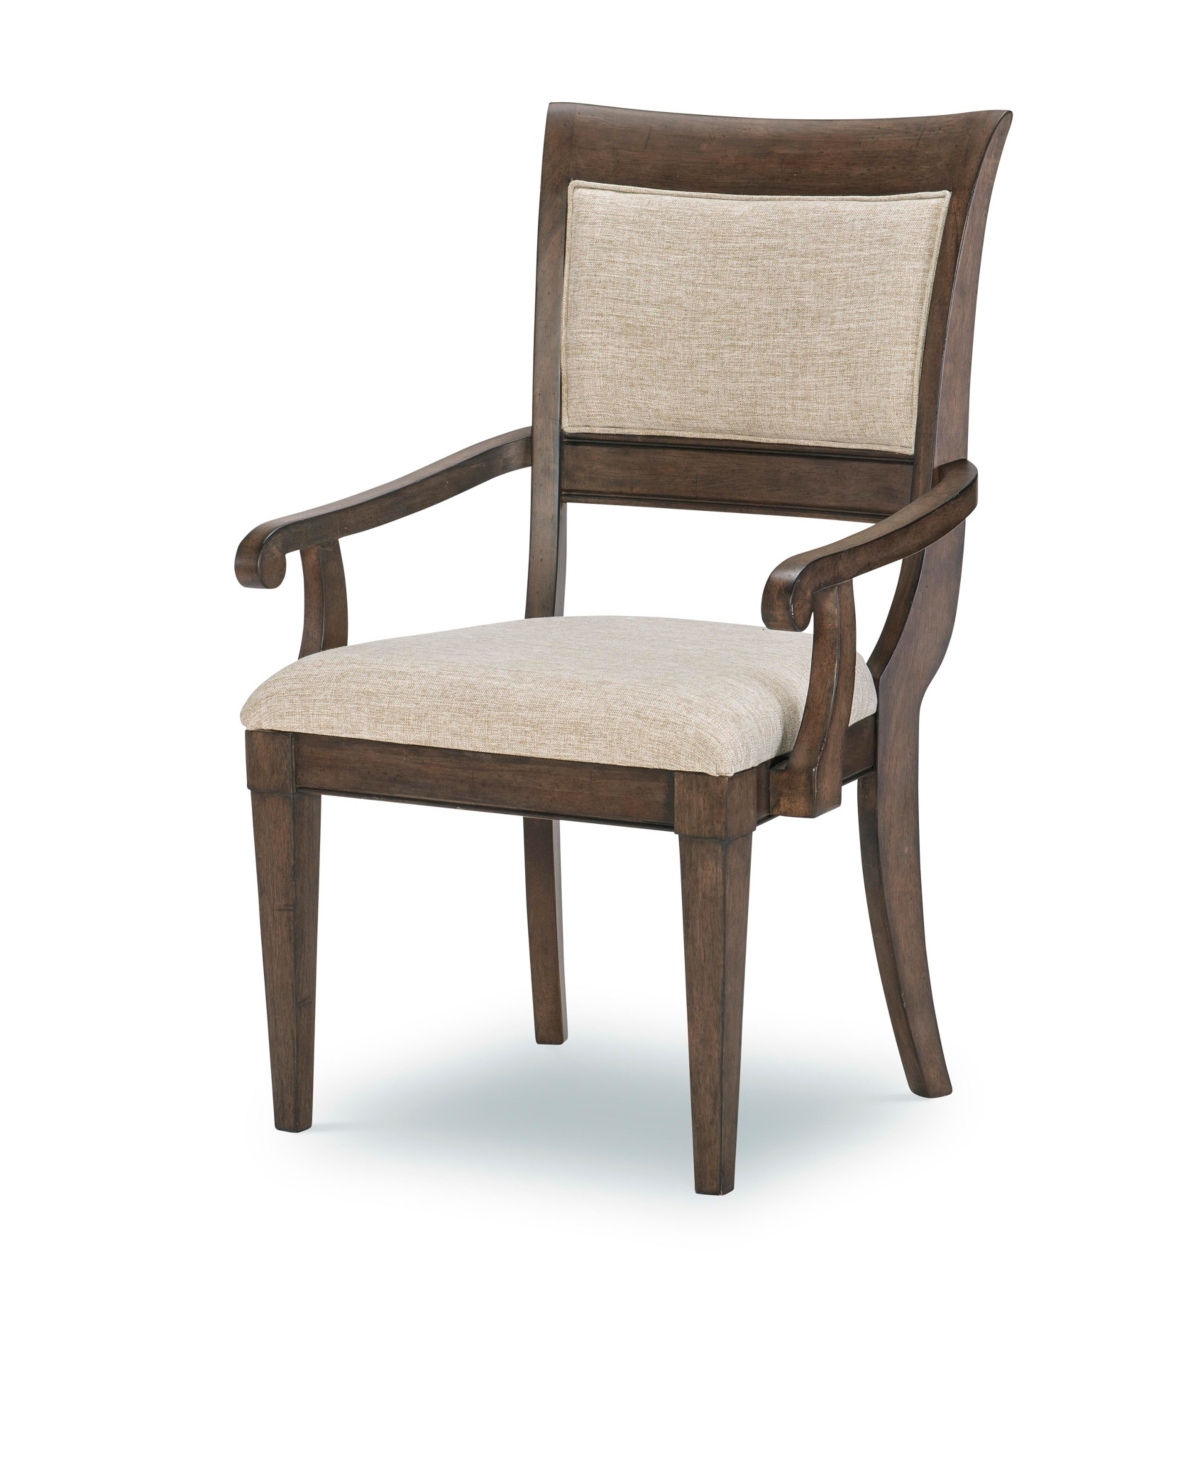 Furniture Stafford Arm Chair 6pc Set, Created For Macy's